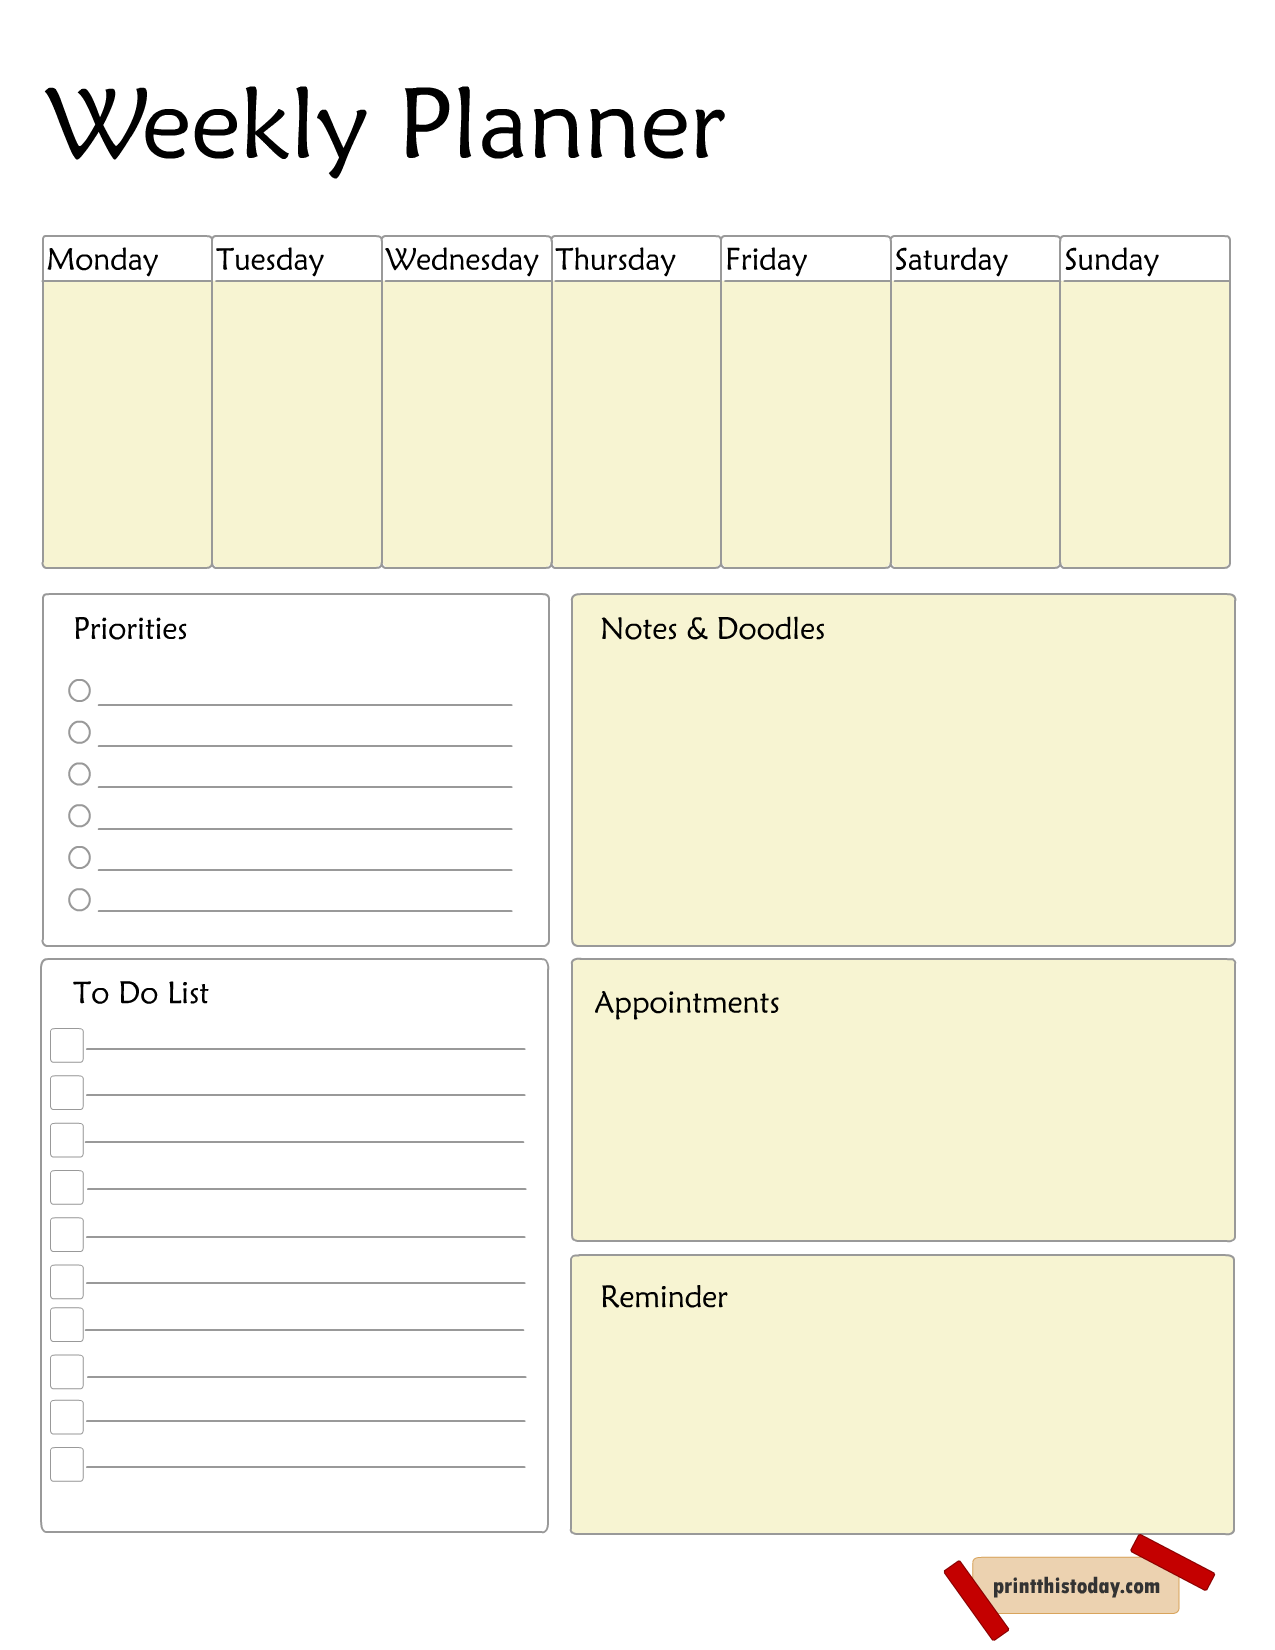 Free Printable Weekley Planner in Yellow and White Colors